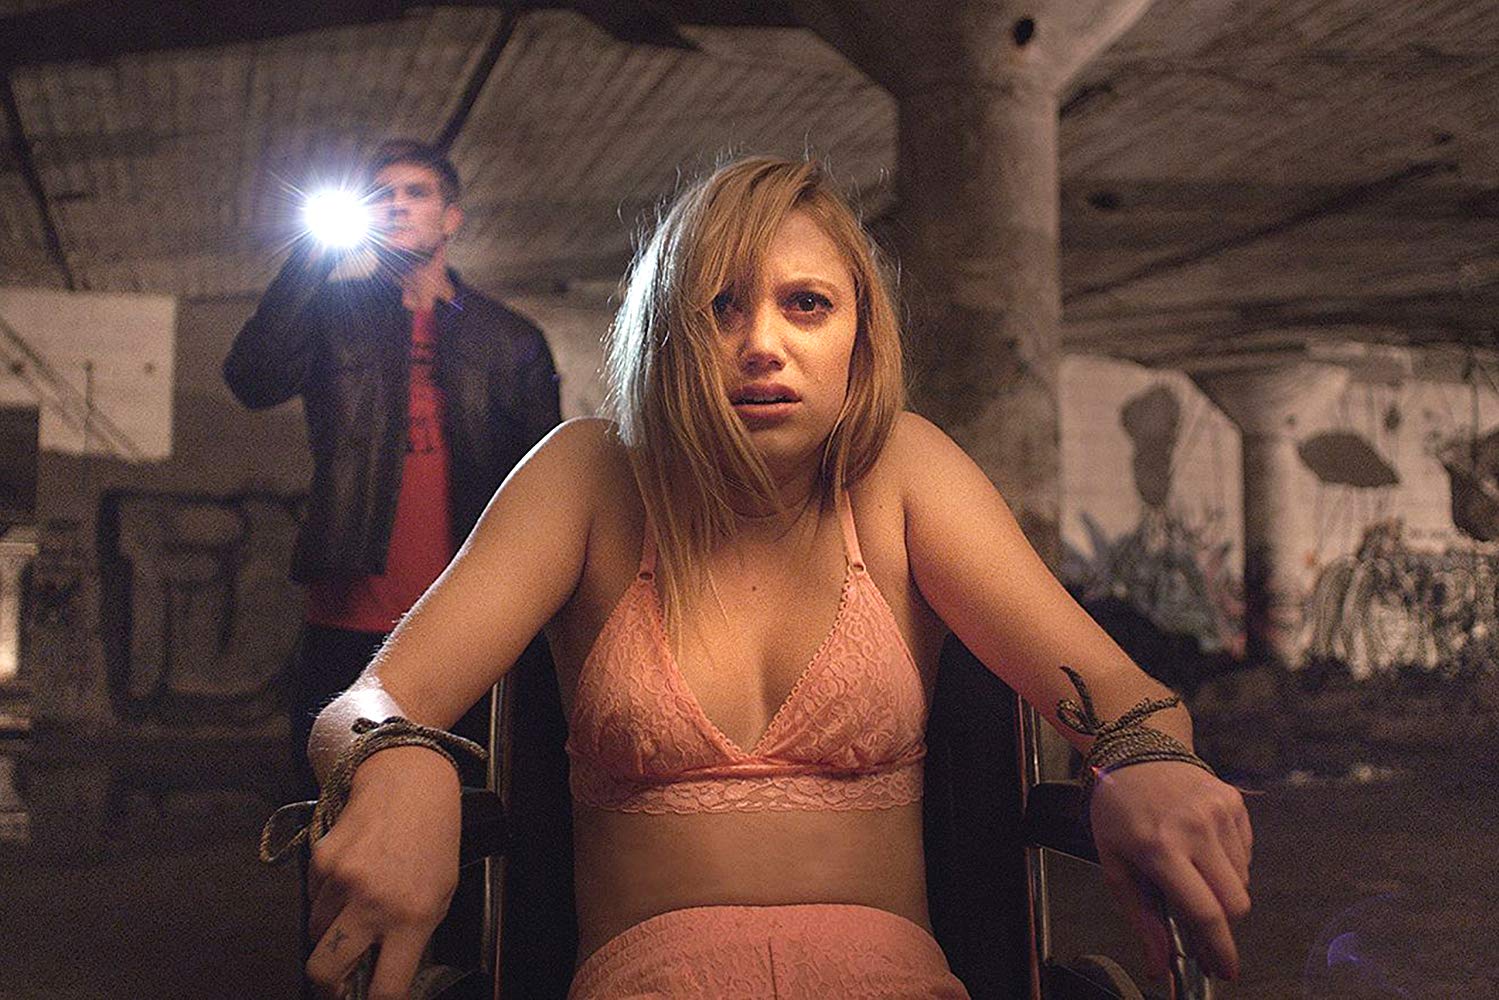 Jay (Maika Monroe) comes around to find herself tied up following her date with Hugh (Jake Weary) (rear) in It Follows (2014)